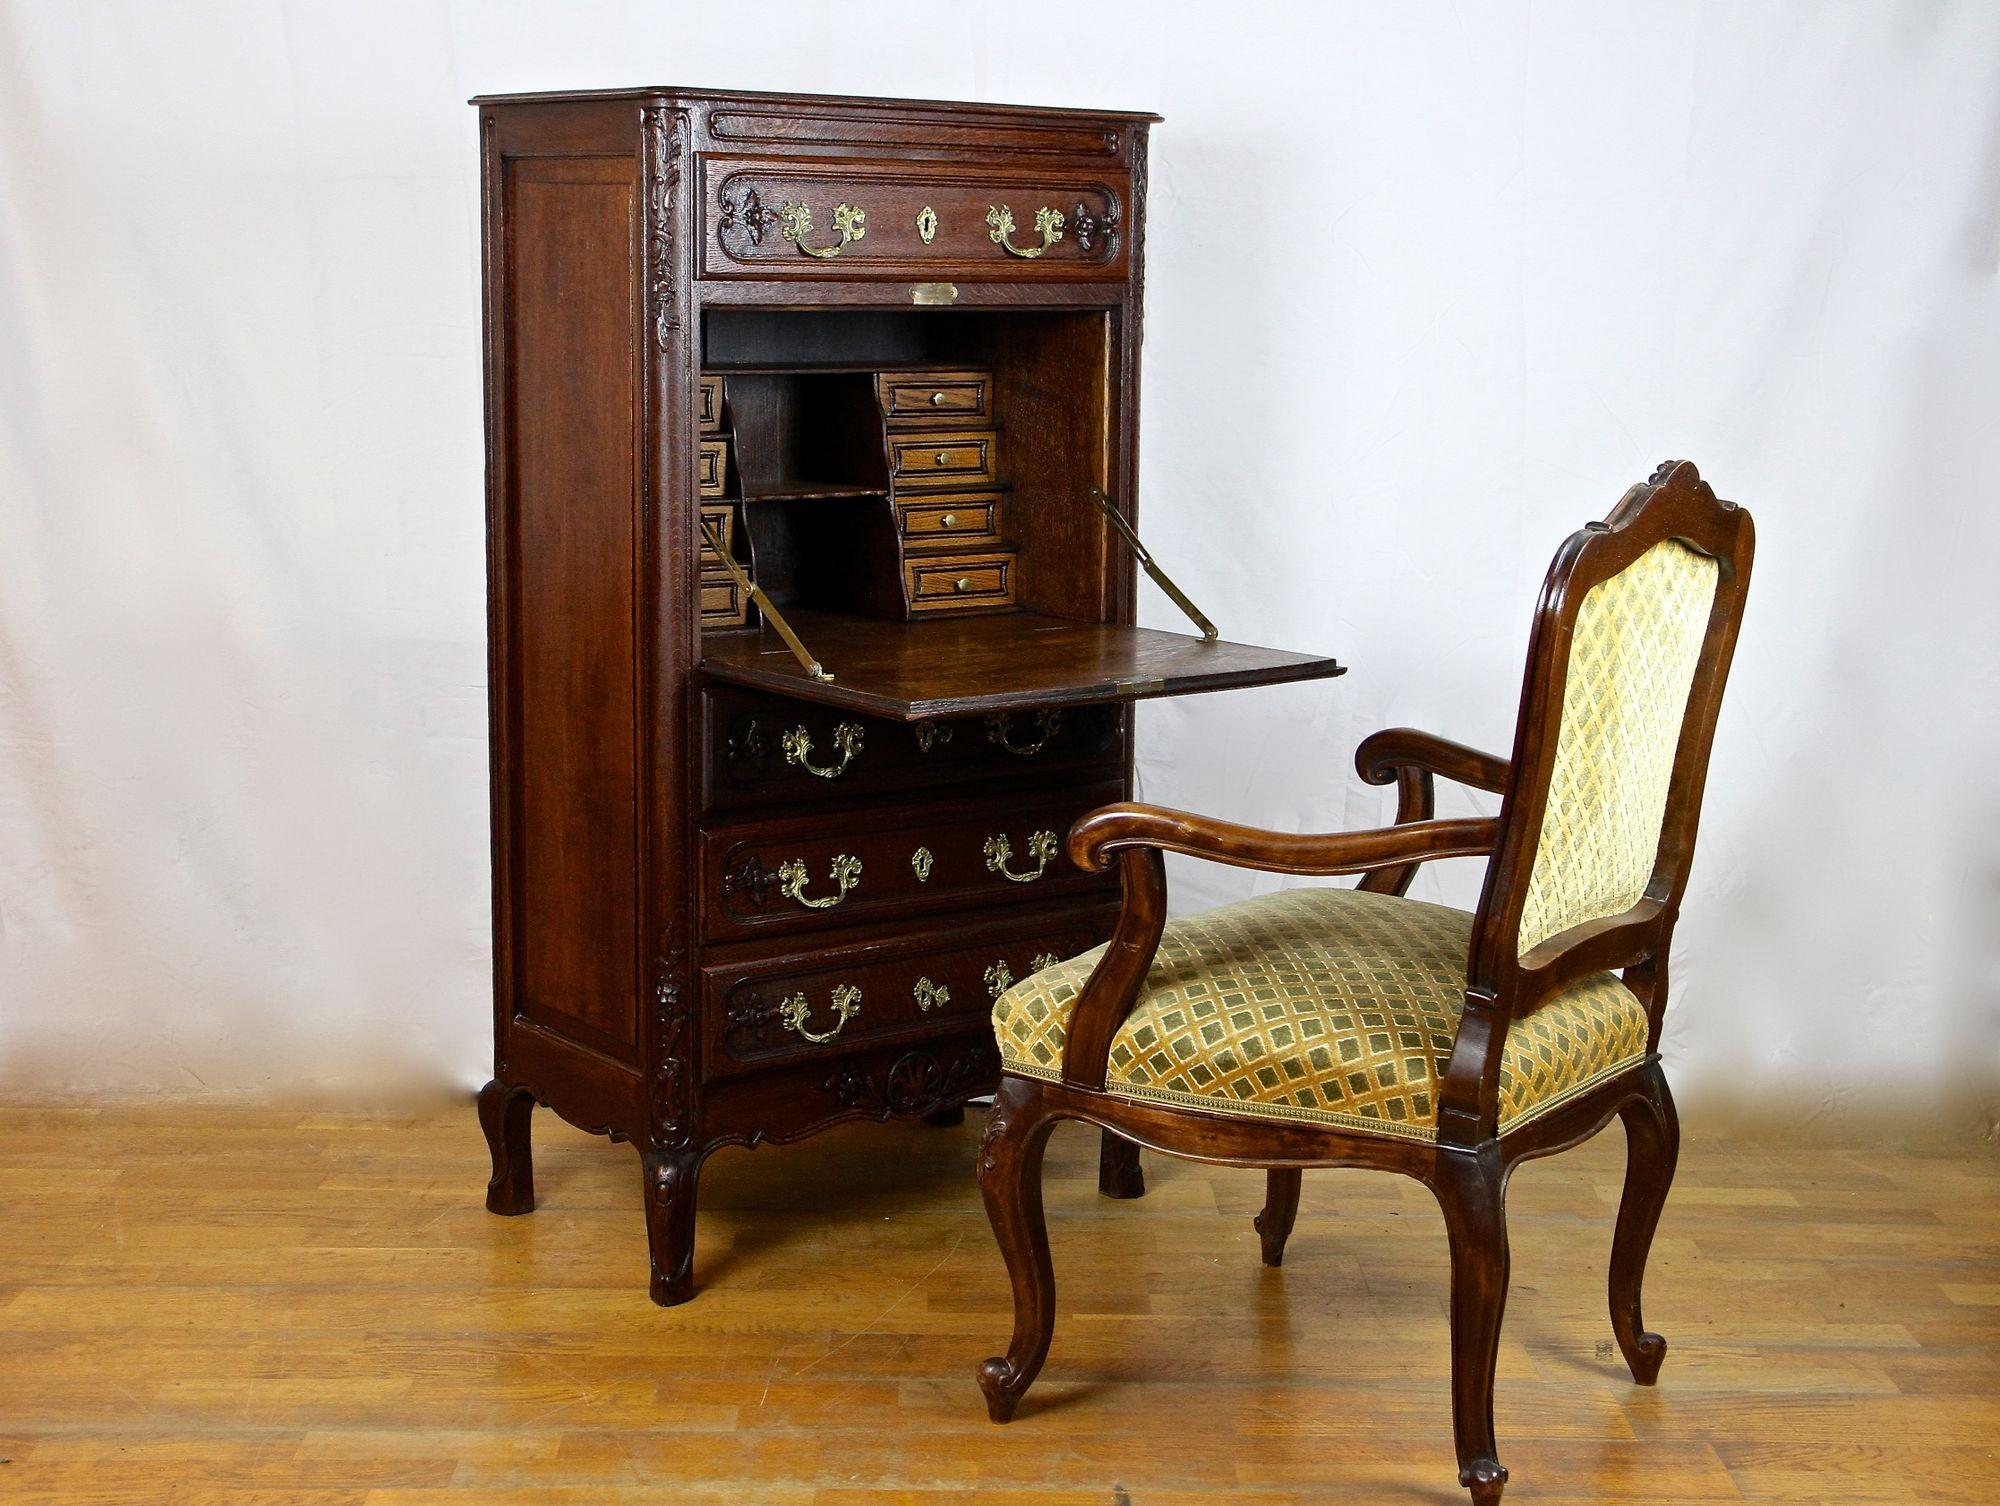 Extraordinary hand-carved oakwood secretary cabinet from the Baroque revival period in Austria. A real unique, perfect sized bureau cabinet/ secretary made of solid oakwood and stained to a very beautiful dark nutwood tone. This secretary cabinet